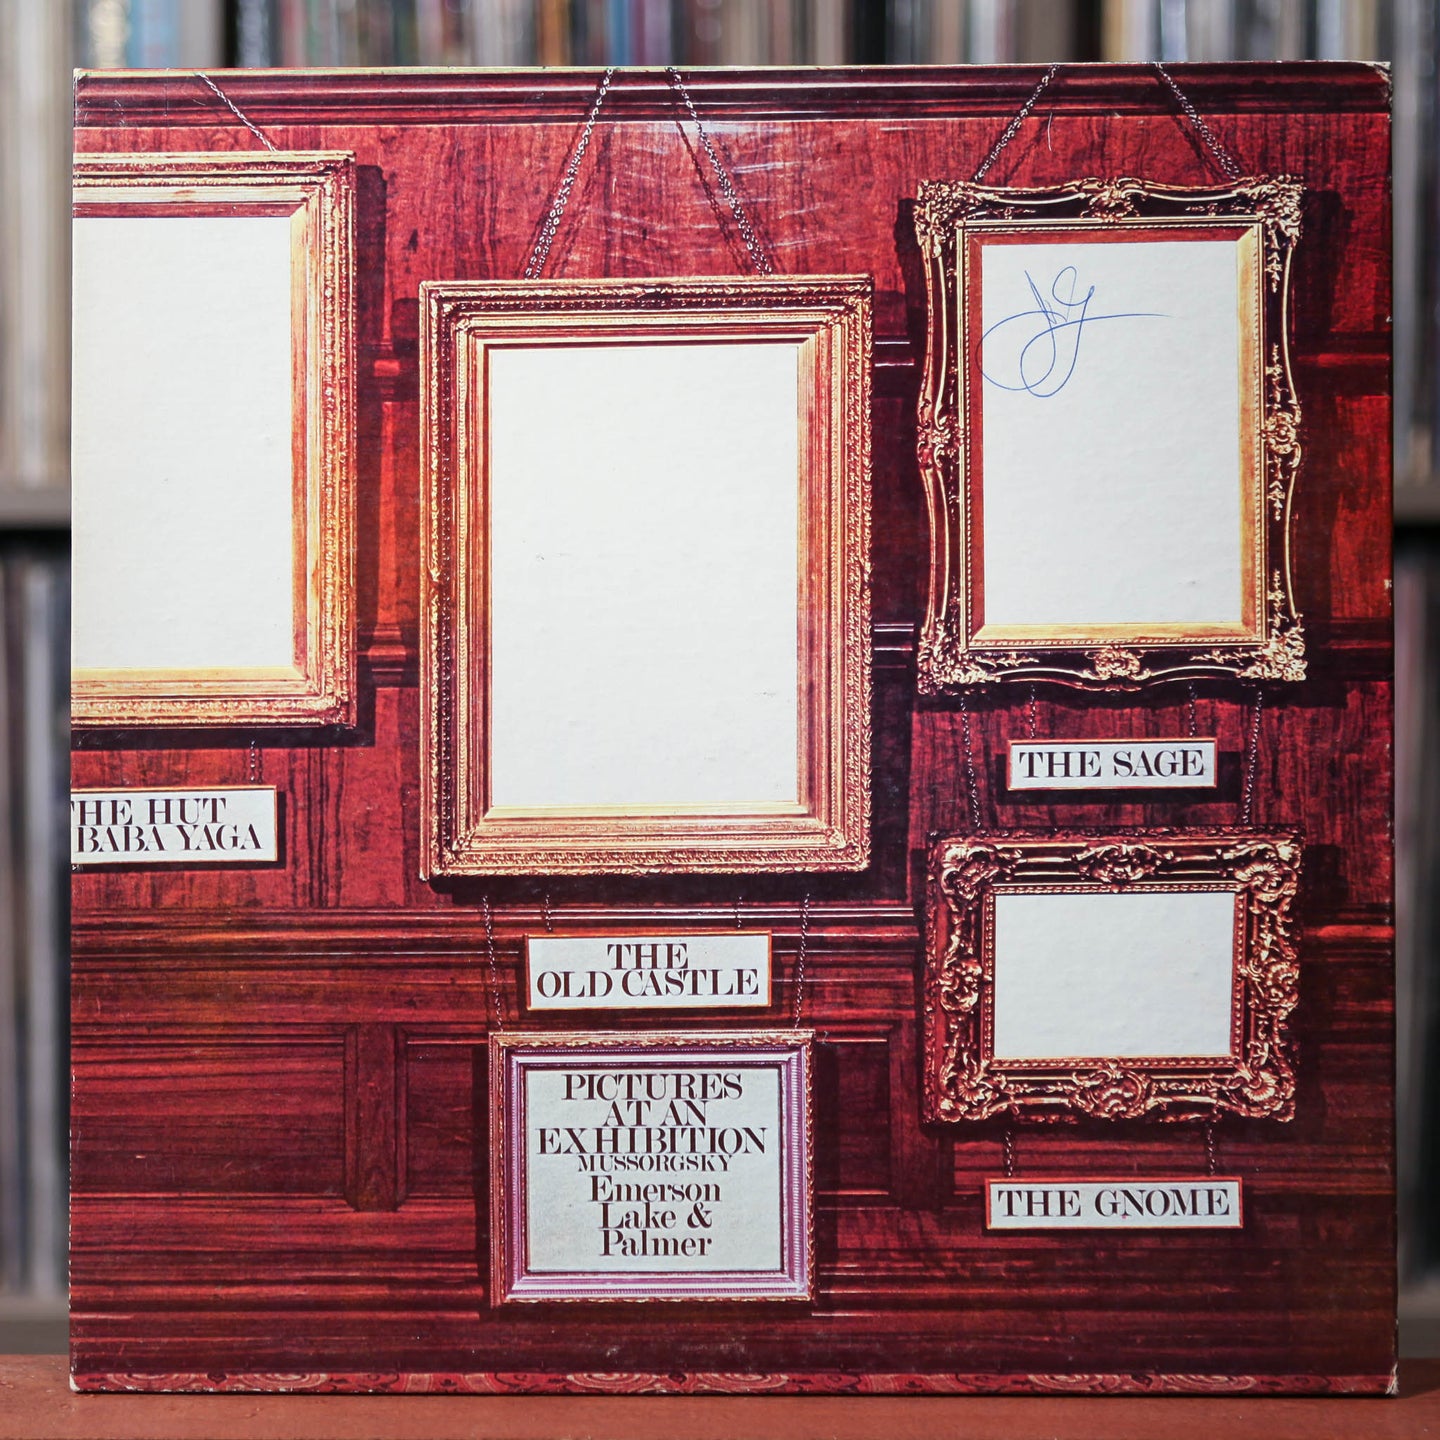 Emerson Lake & Palmer - Pictures At An Exhibition - 1972 Cotillion, VG+/VG+